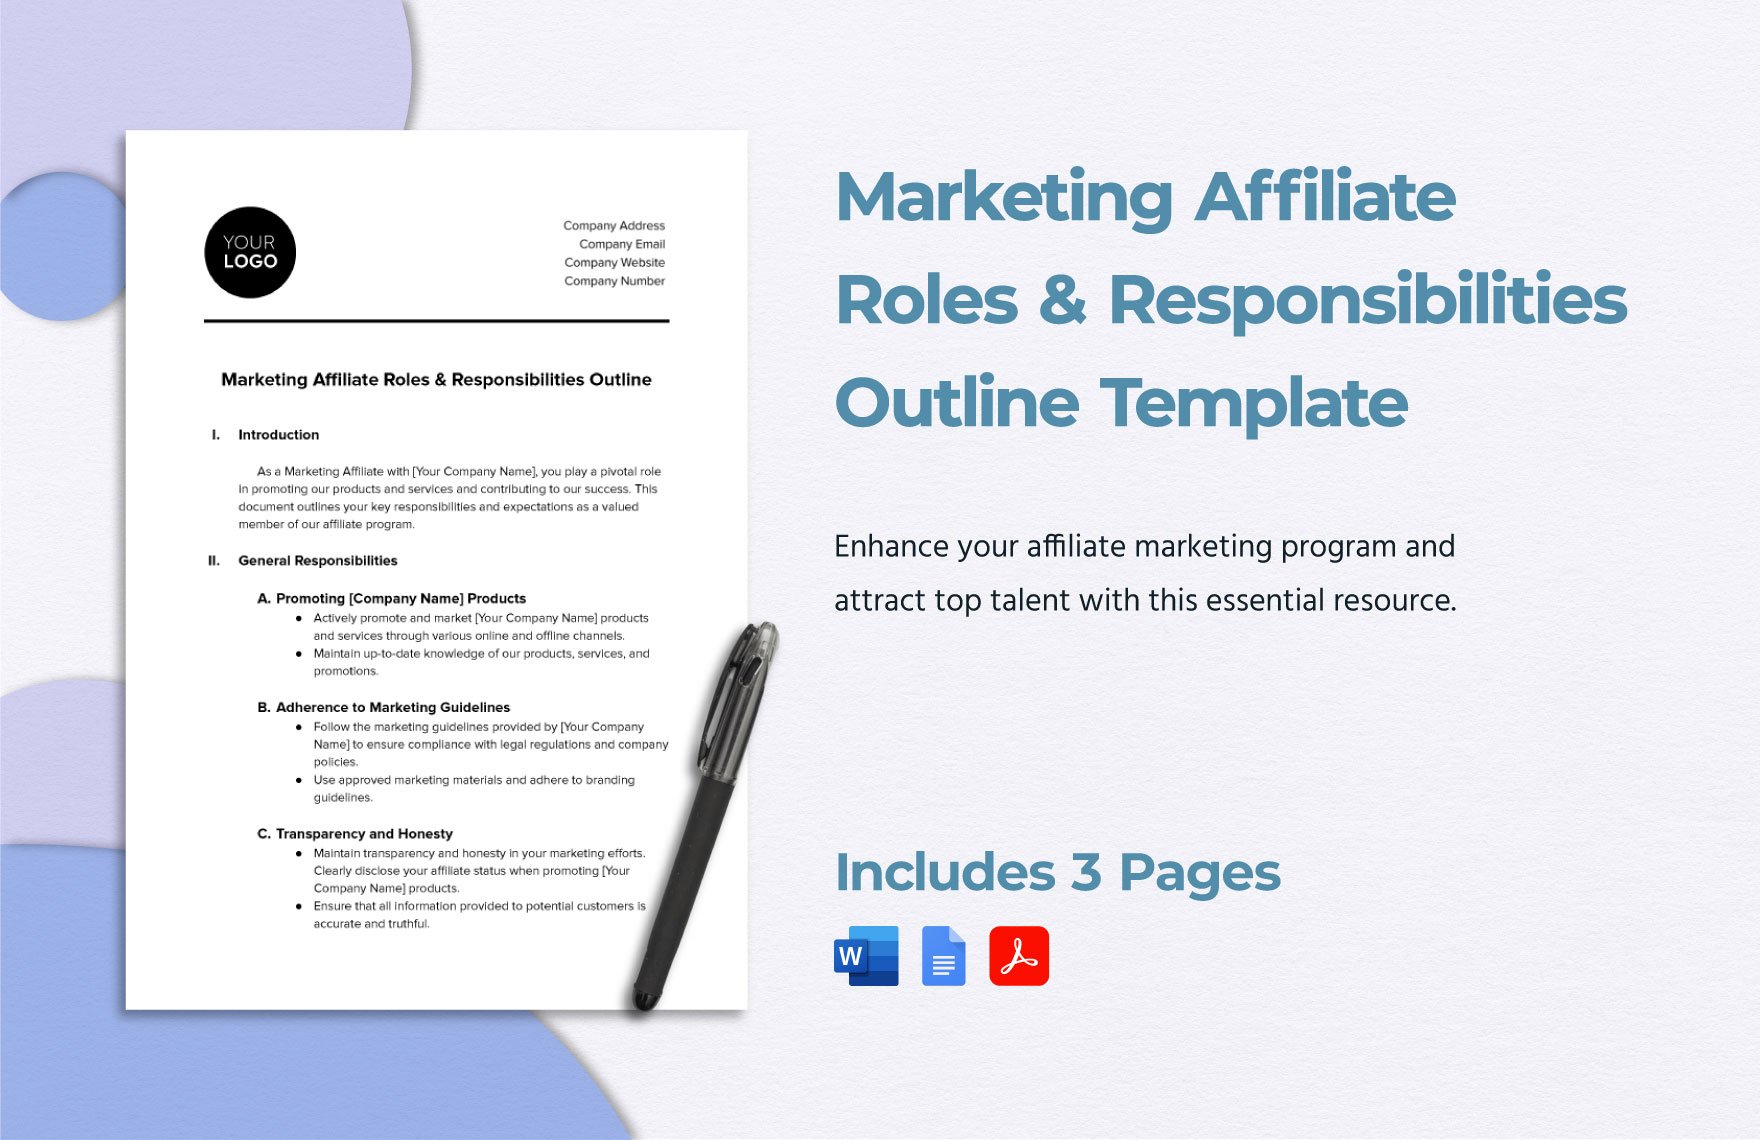 Marketing Affiliate Roles & Responsibilities Outline Template in Word, Google Docs, PDF